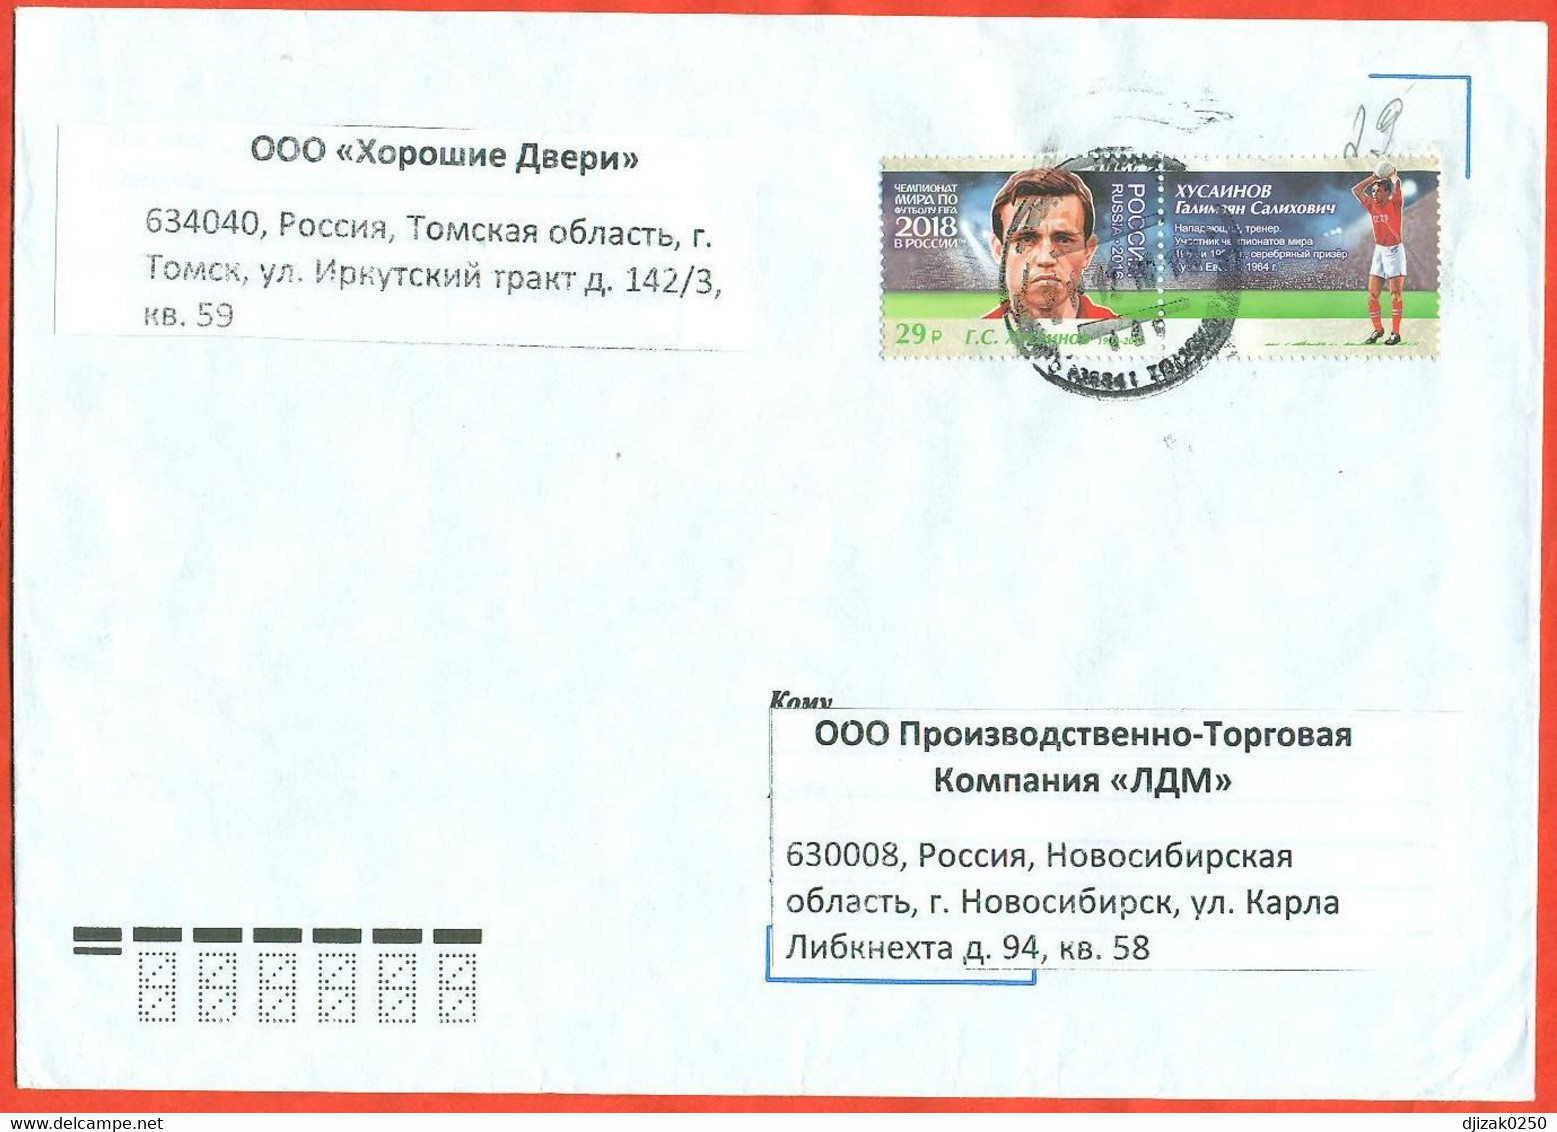 Russia 2018. FIFA Football World Cup 2018, Russia - Legends Of Russian Football The Envelope  Passed Through The Mail. - 2018 – Rusia